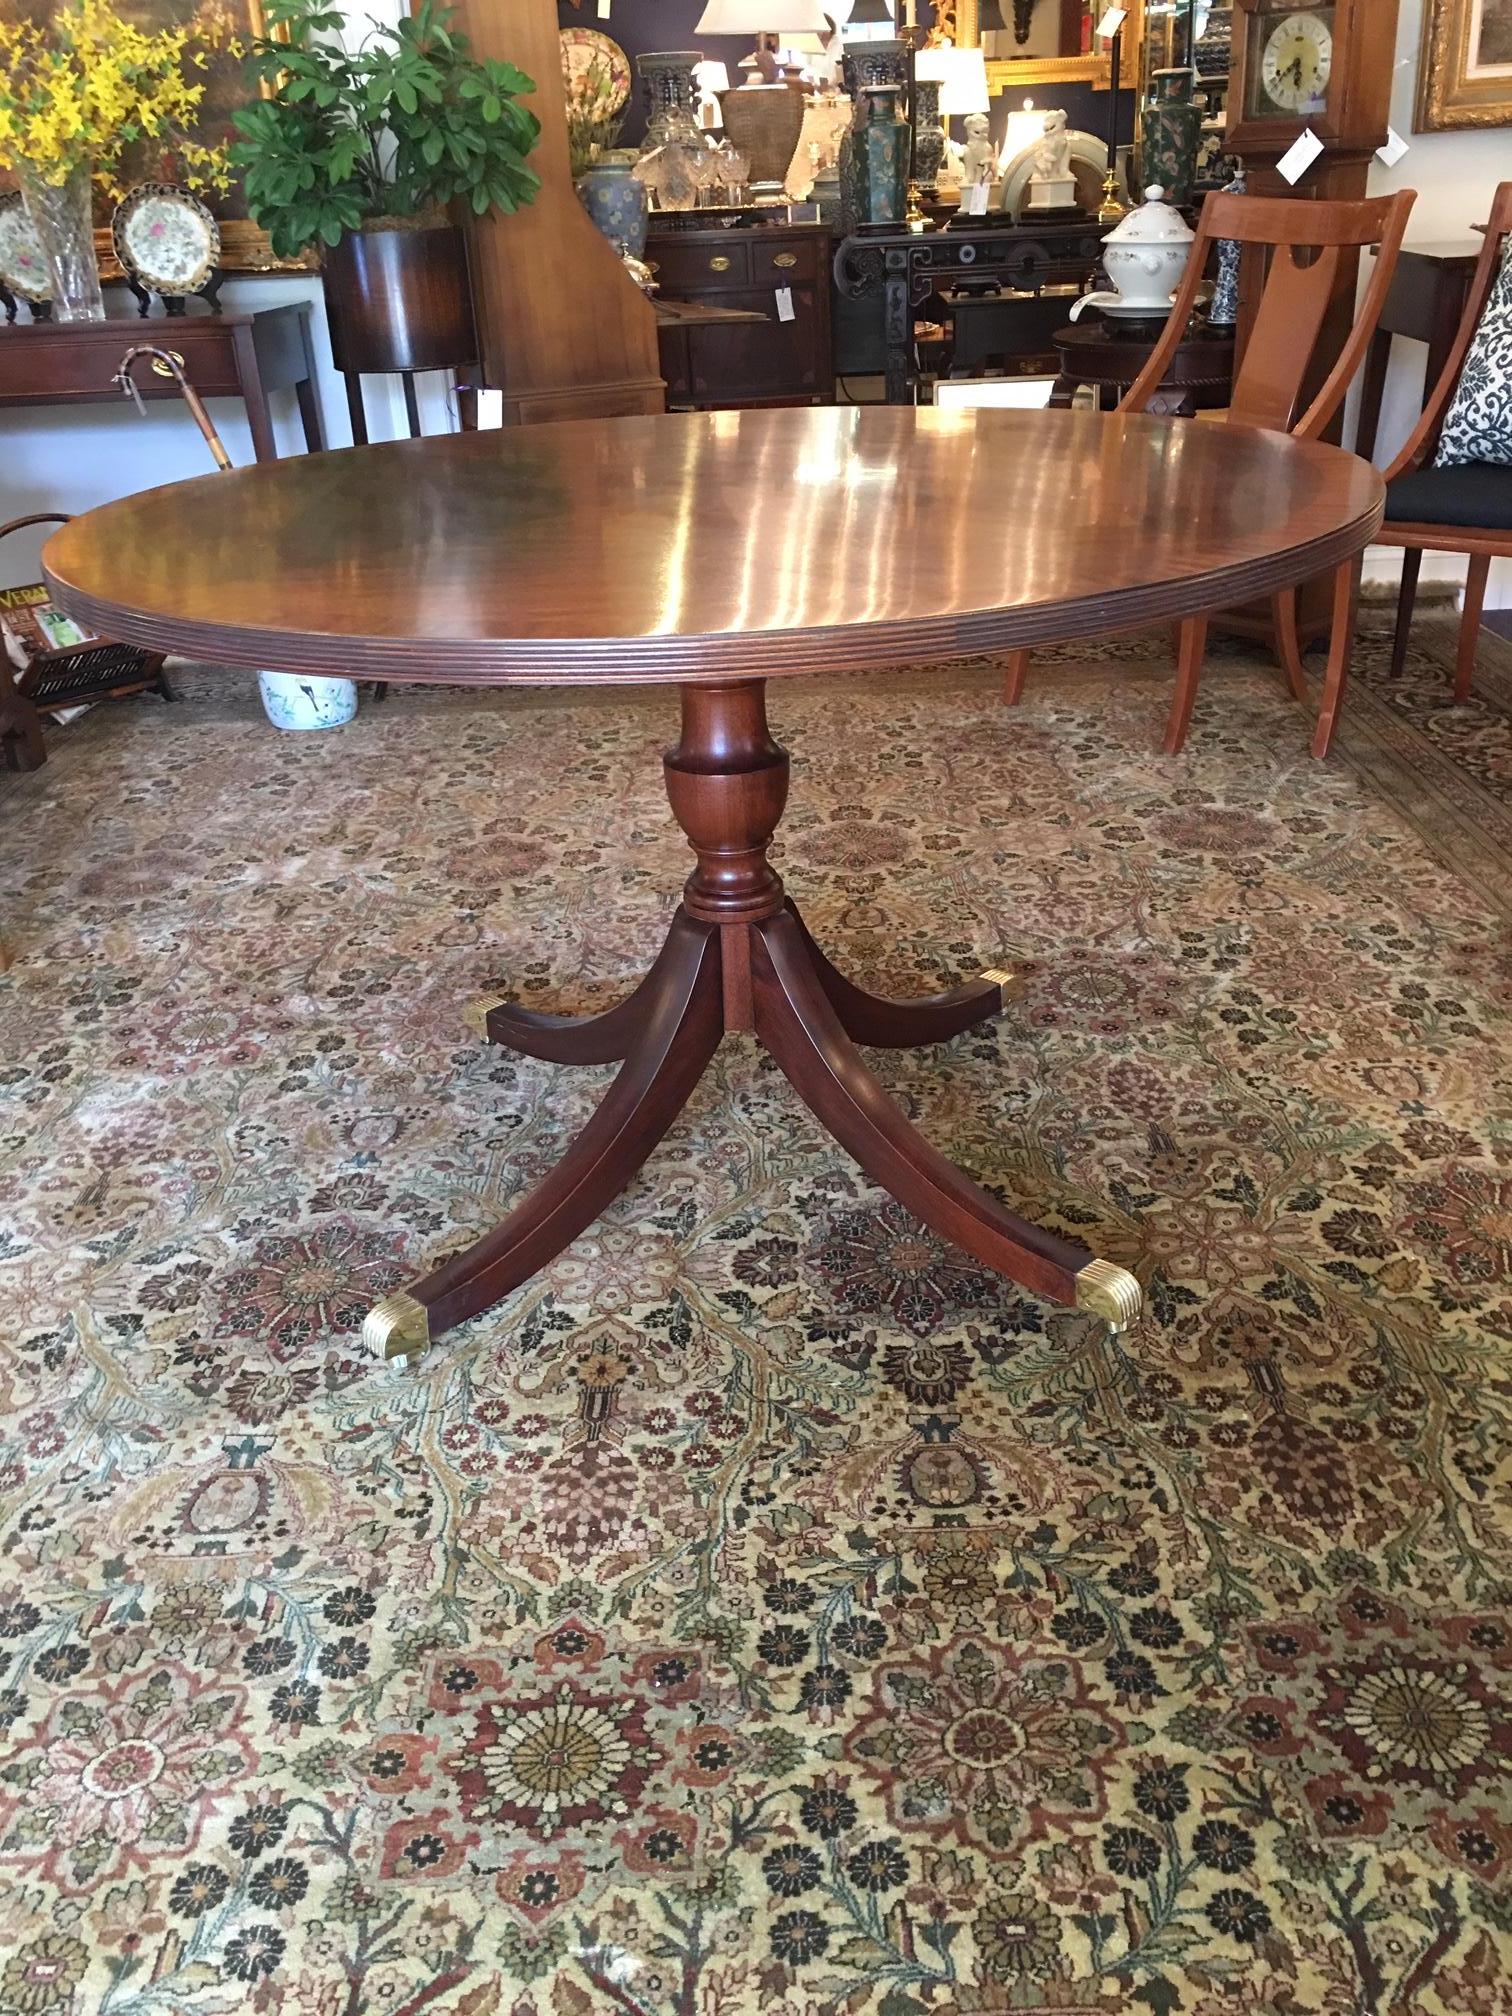 This beautiful Henkle-Harris centre table comes with a custom table pad (not pictured) . It was made in Winchester, Virgina and is dated 1996. This would make a gracious centre table. It has a single pedestal, brass feet, and casters.